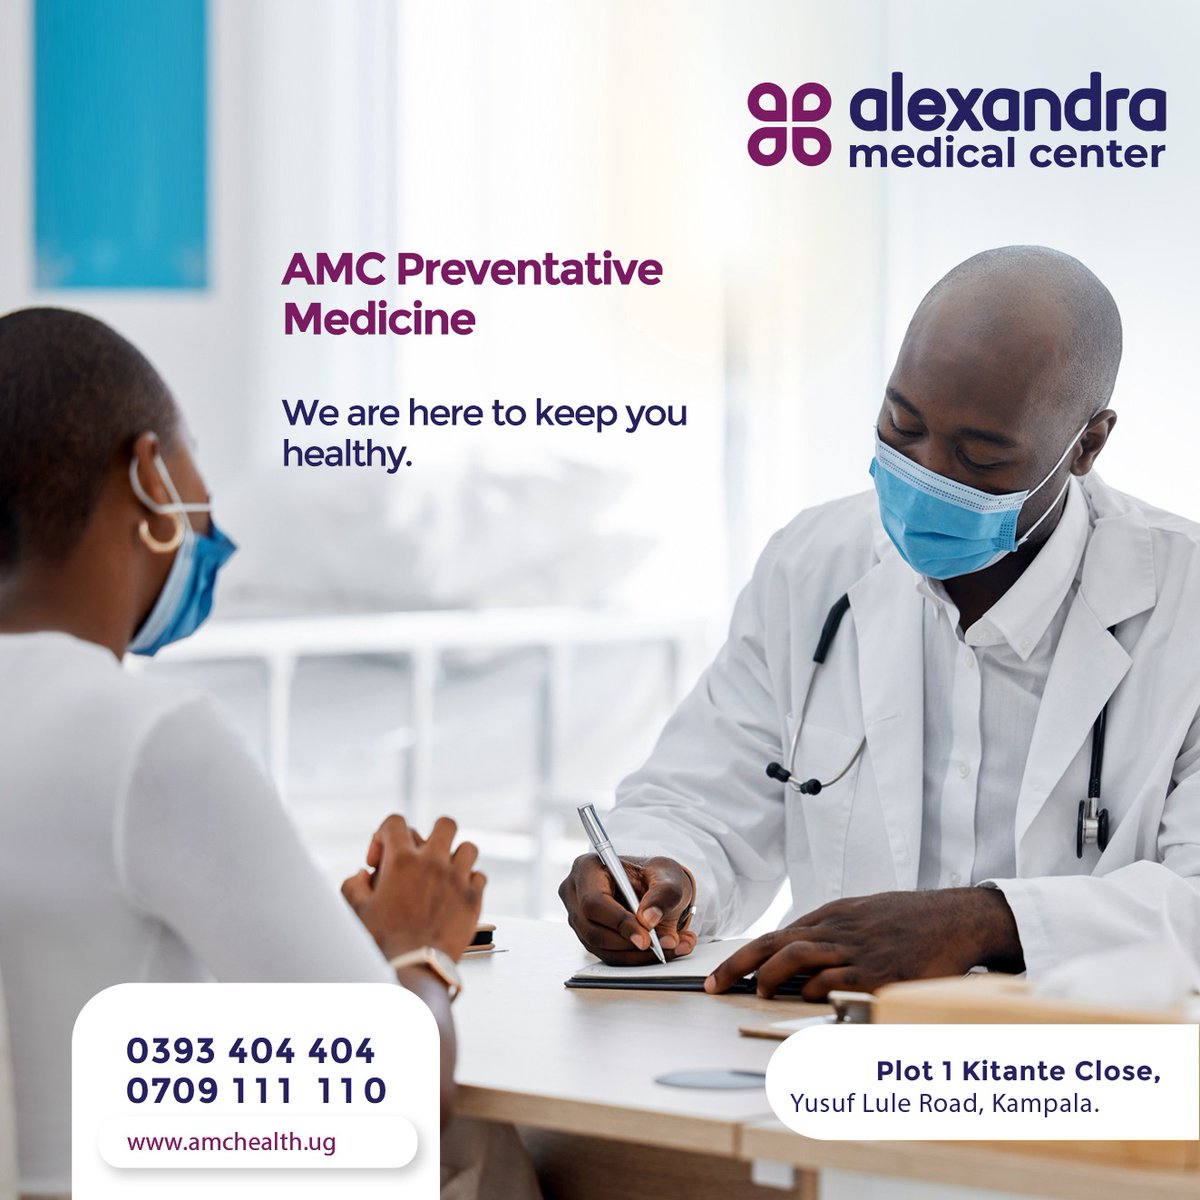 Our goal is to ultimately prevent diseases to improve patient well-being.

Visit us today at Plot 1 Kitante Close, Yusuf Lule Road and have a consultation with our Preventive Medicine Specialists.

#PreventiveMedicine #HealthCare #wednesdaythought